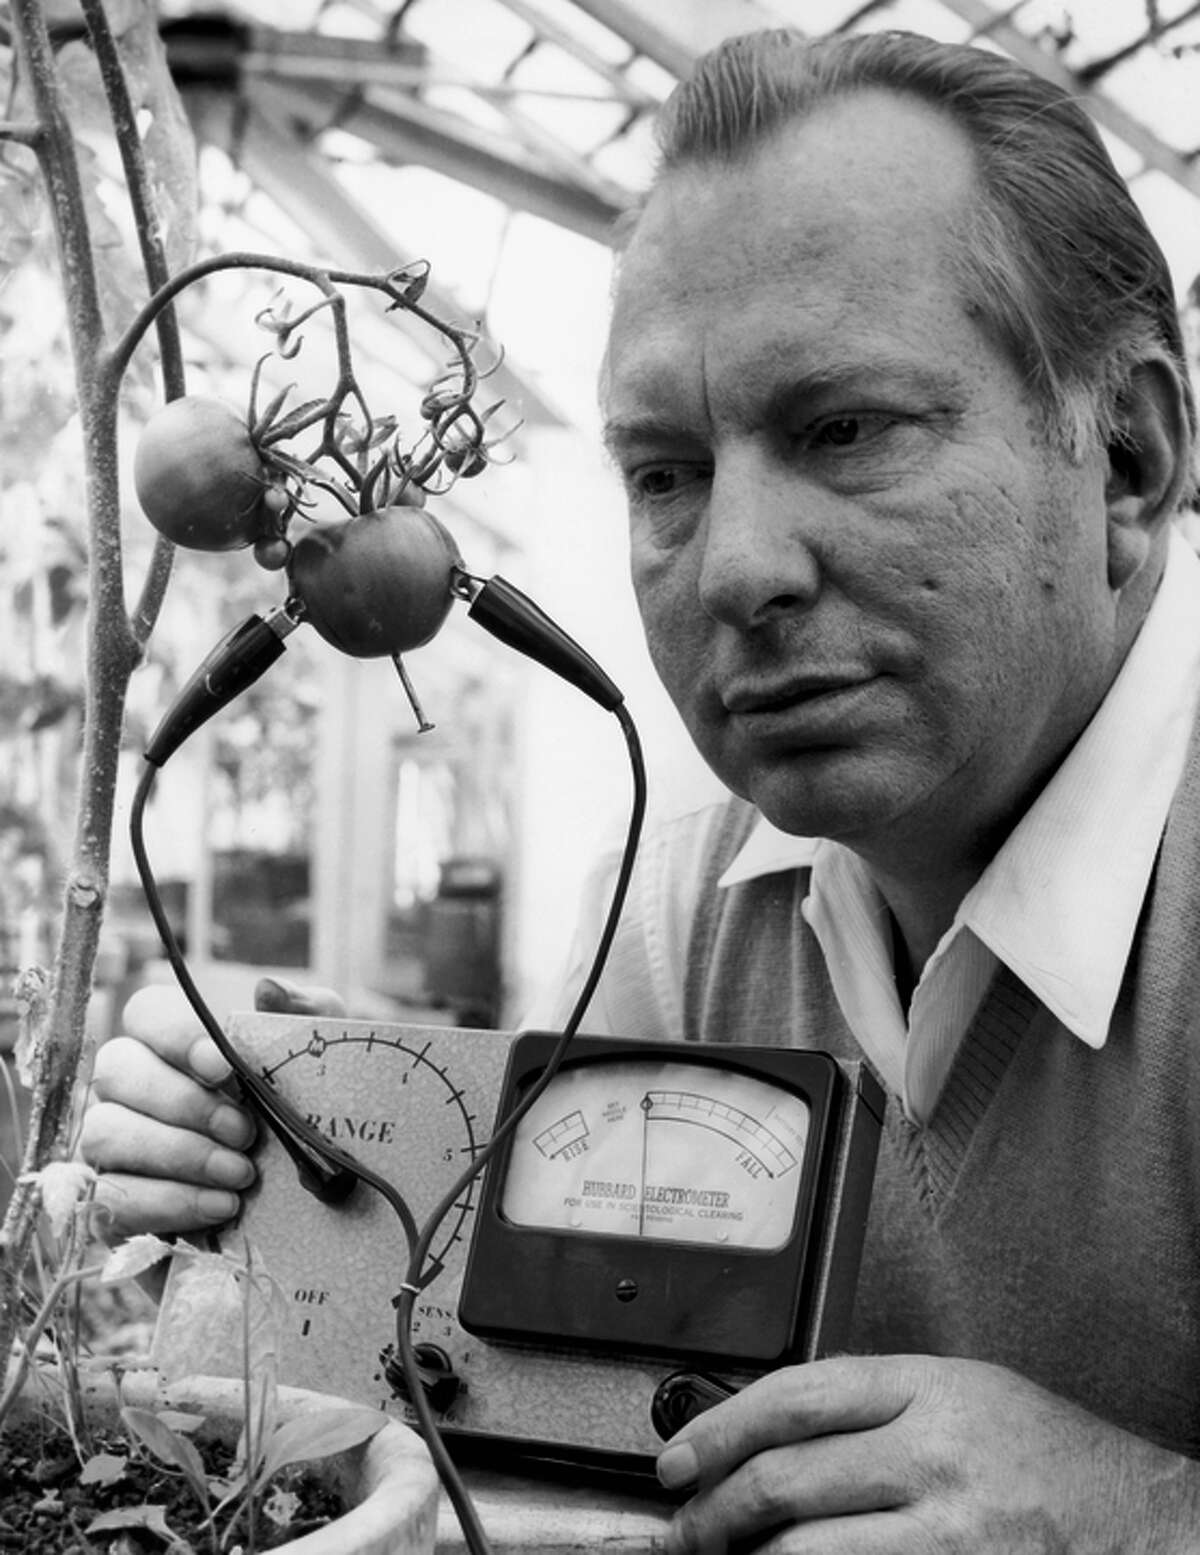 Science-fiction writer L. Ron Hubbard founded Scientology.